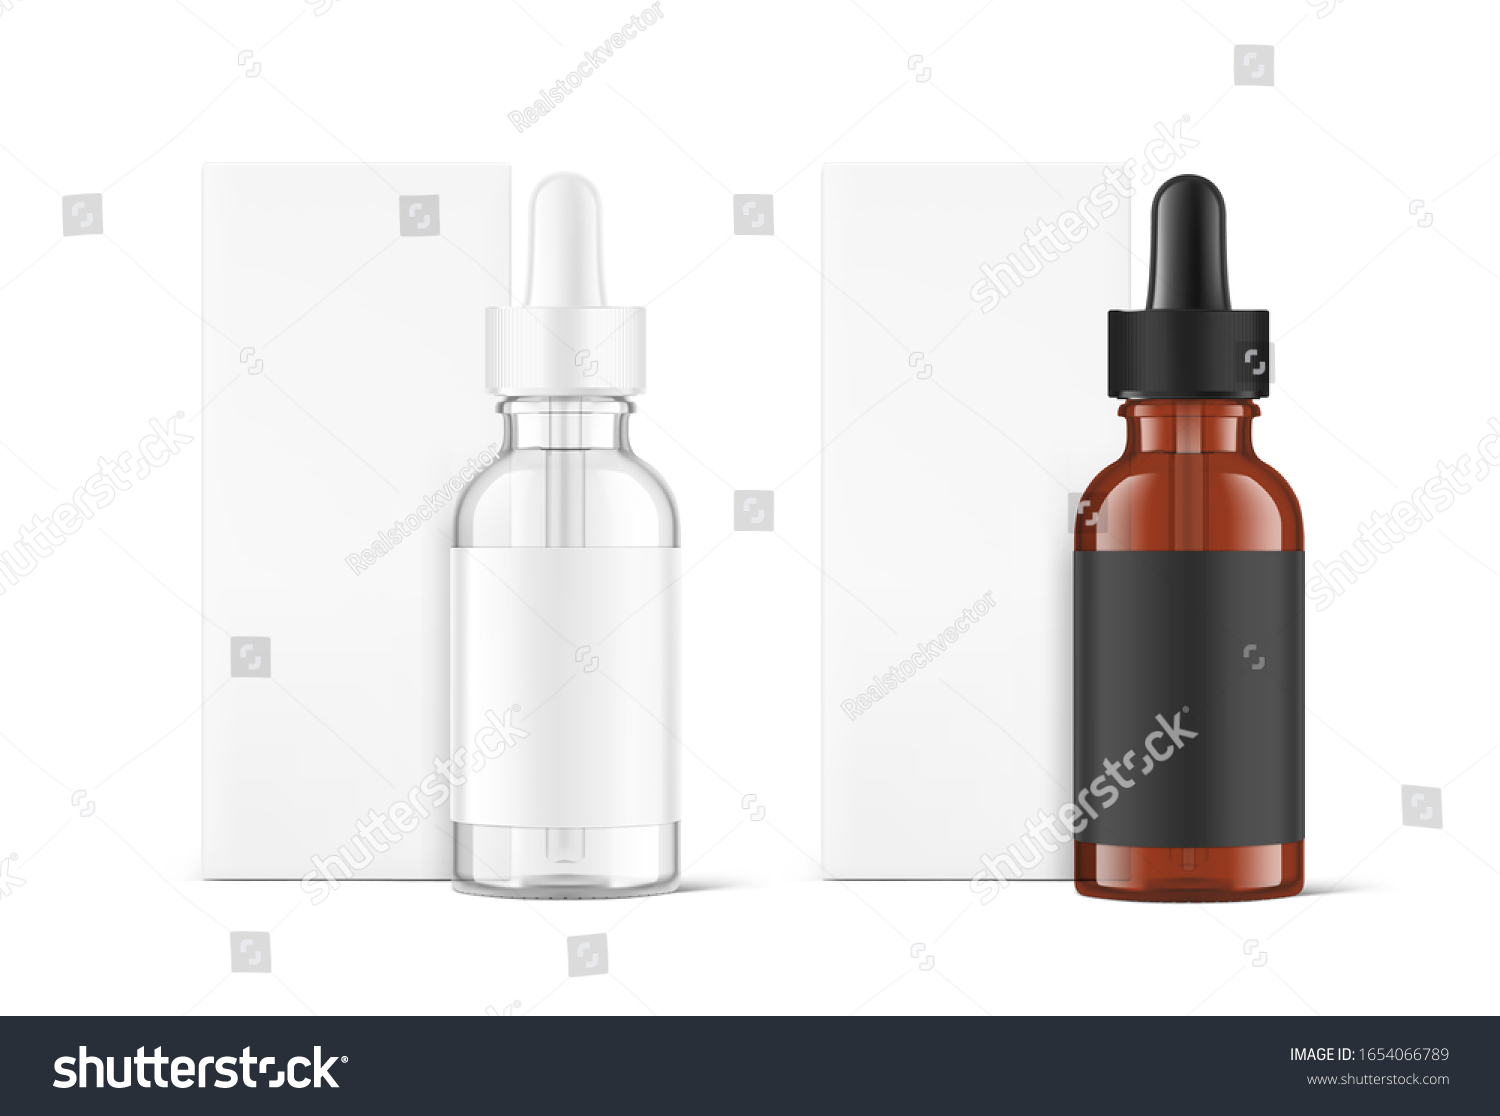 Realistic cardboard packaging box mockup with dropper bottle mockup isolated on white background.Vector illustration.  Сan be used for cosmetic, medical and other needs. EPS10. #1654066789